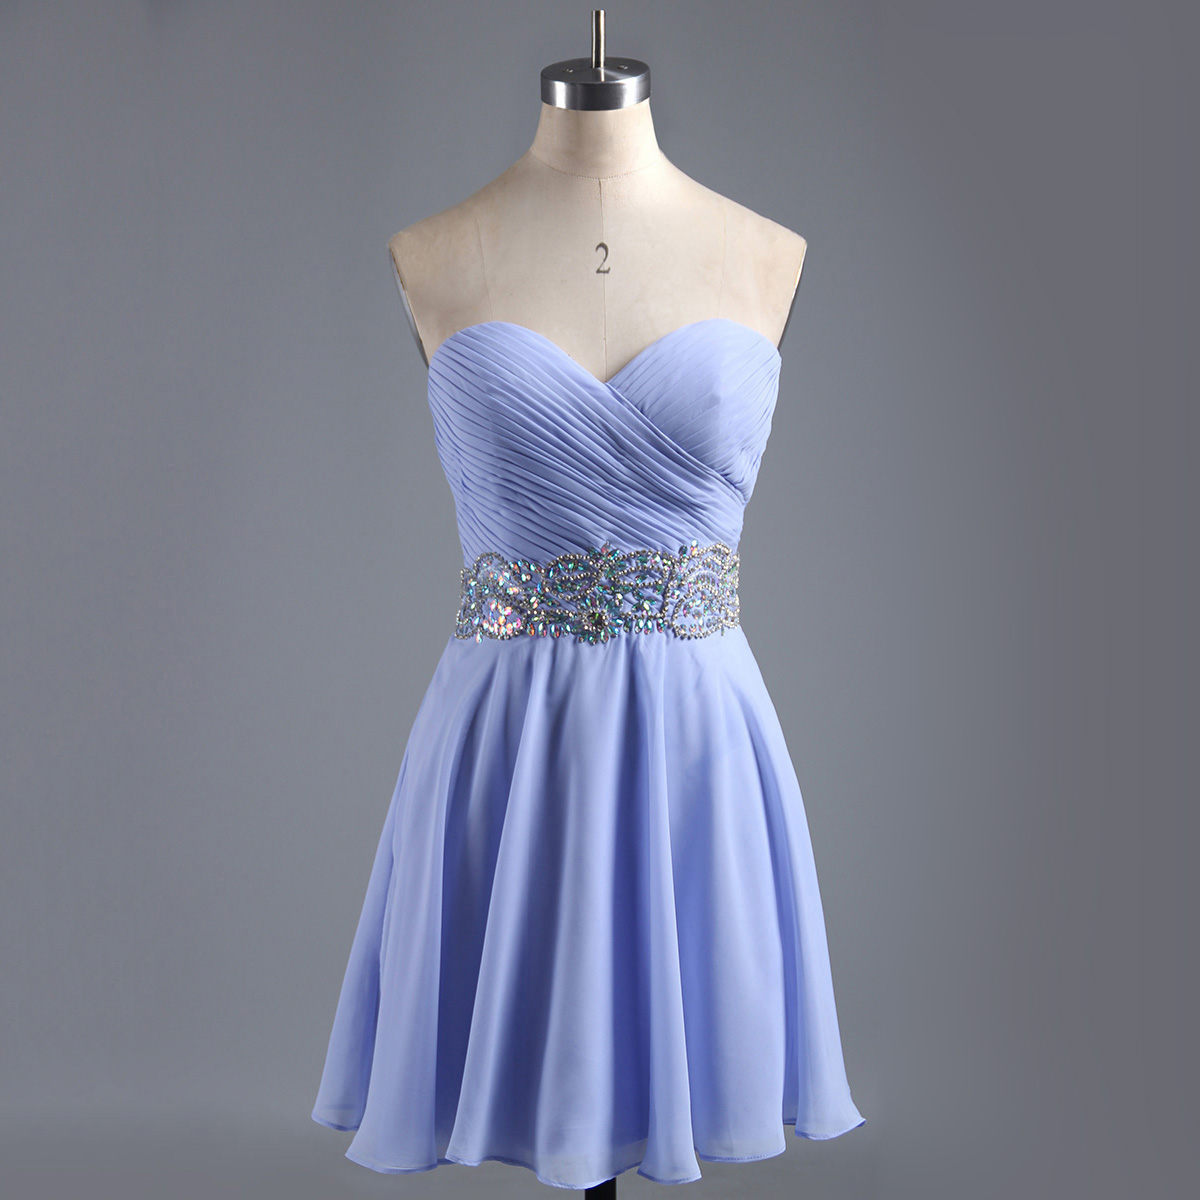 Sweetheart Homecoming Dresses With Ruching Detail, Mini Blue Violet ...